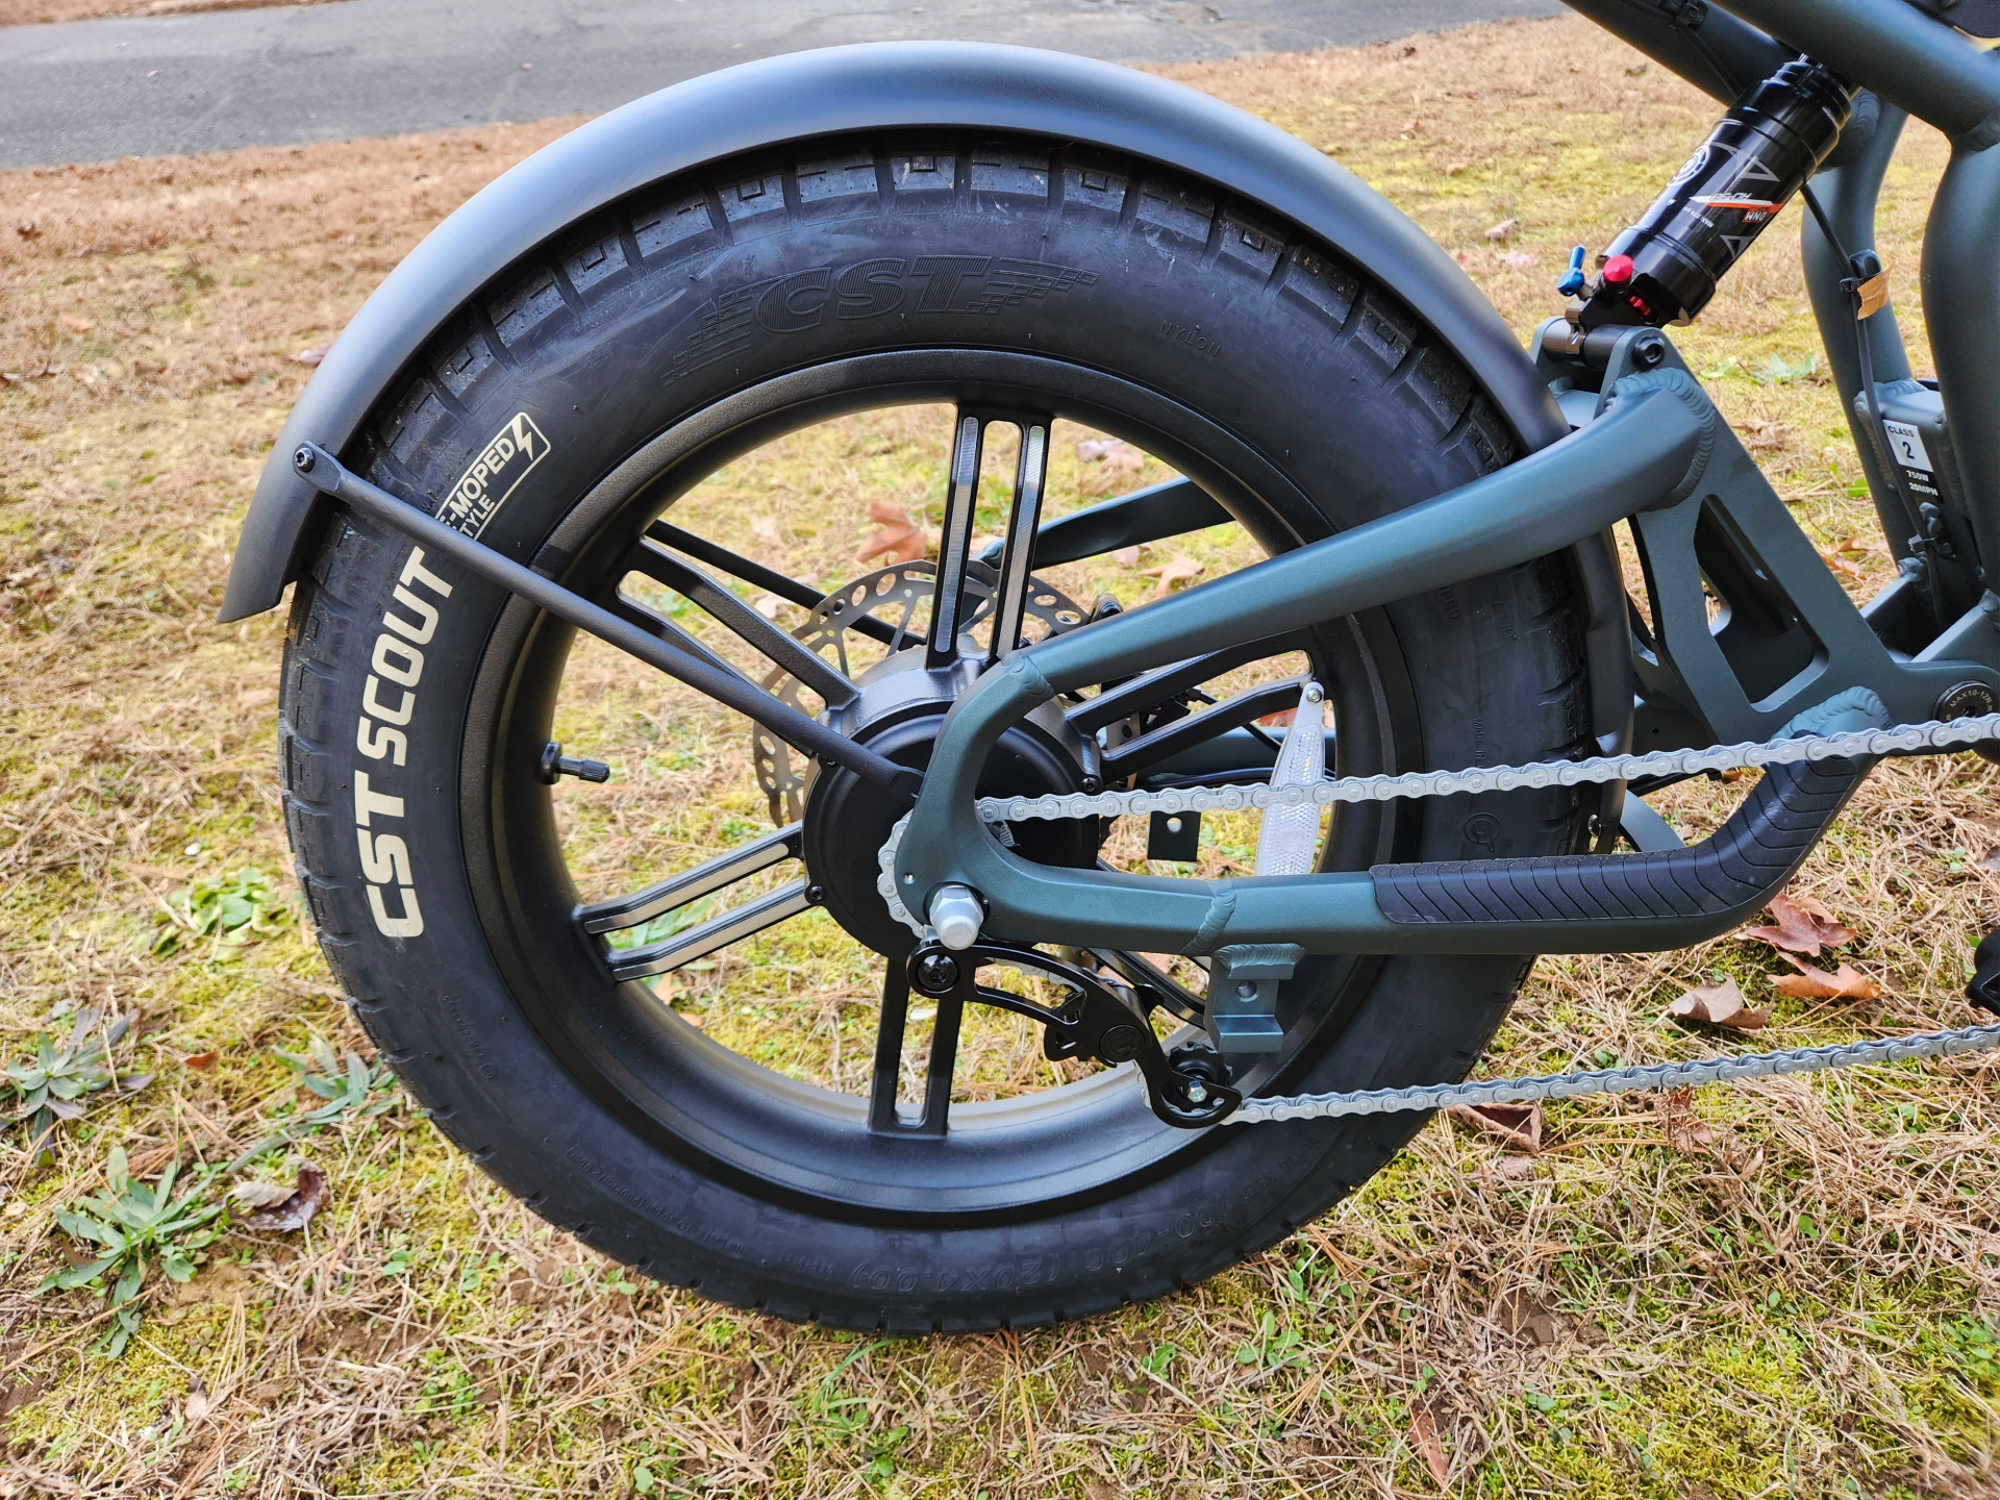 Ride1up Revv1 e-bike review: almost an electric motorcycle